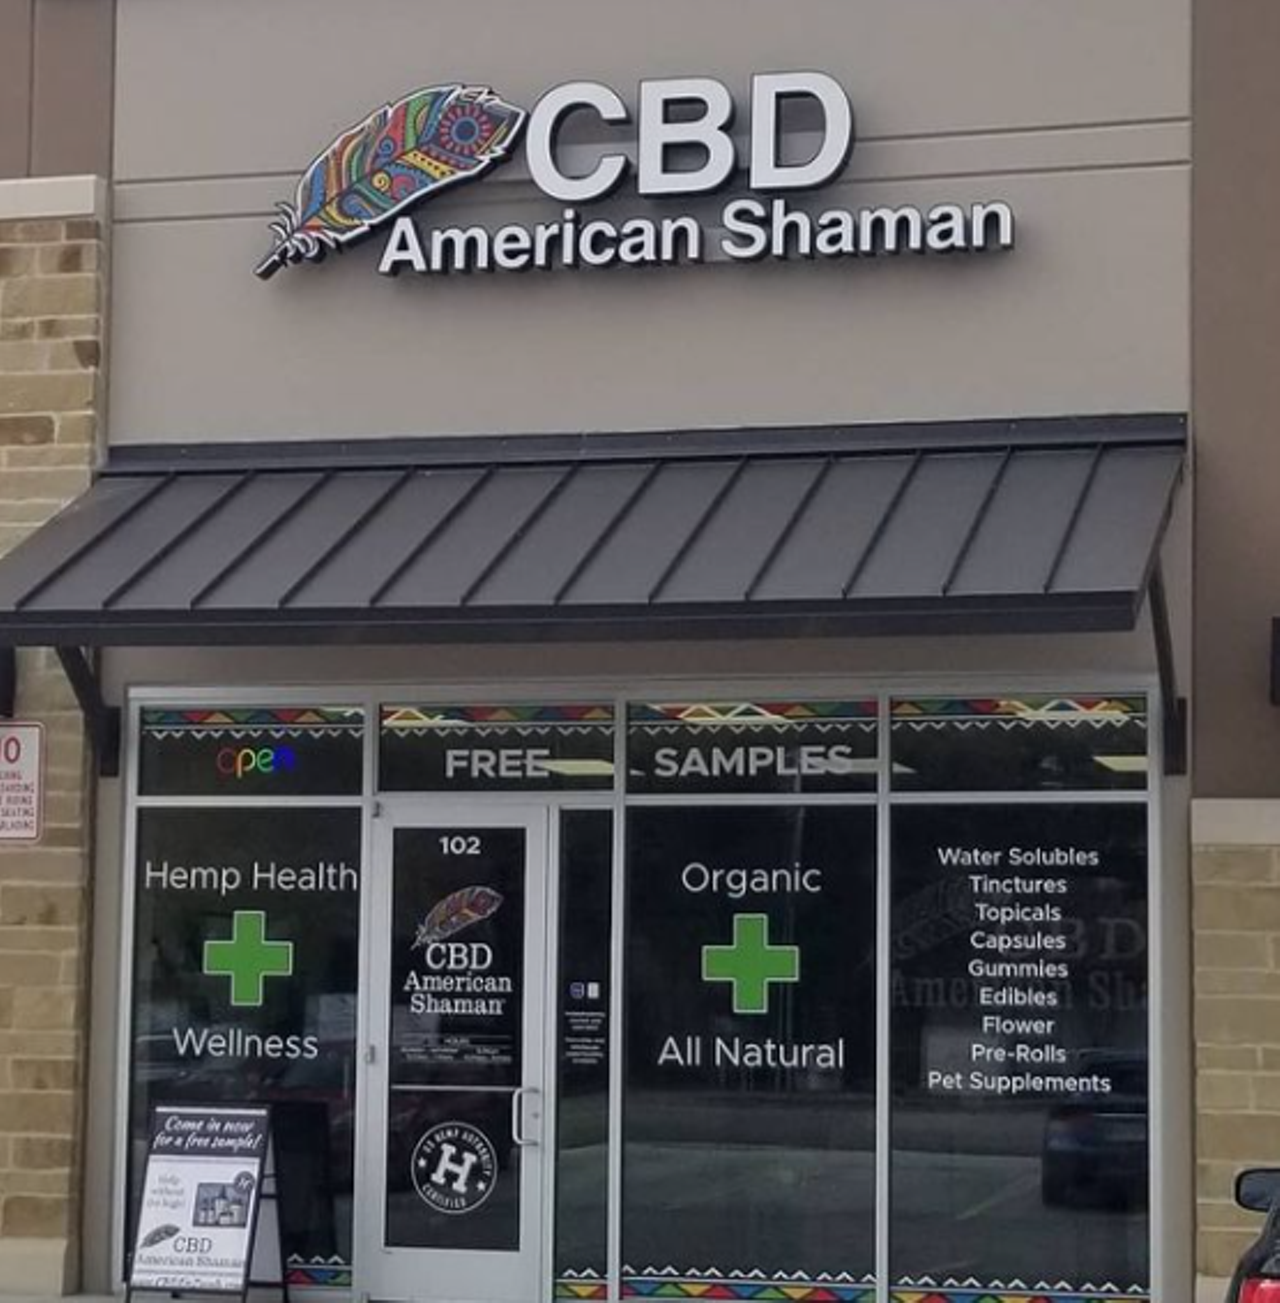 CBD American Shaman
Multiple locations, cbdamericanshaman.com
CBD American Shaman’s ultra-concentrated terpene rich CBD oil offers an eco-friendly and gluten-free option derived from all-natural and high-quality industrial hemp.
Photo via Instagram / americanshamandezavala